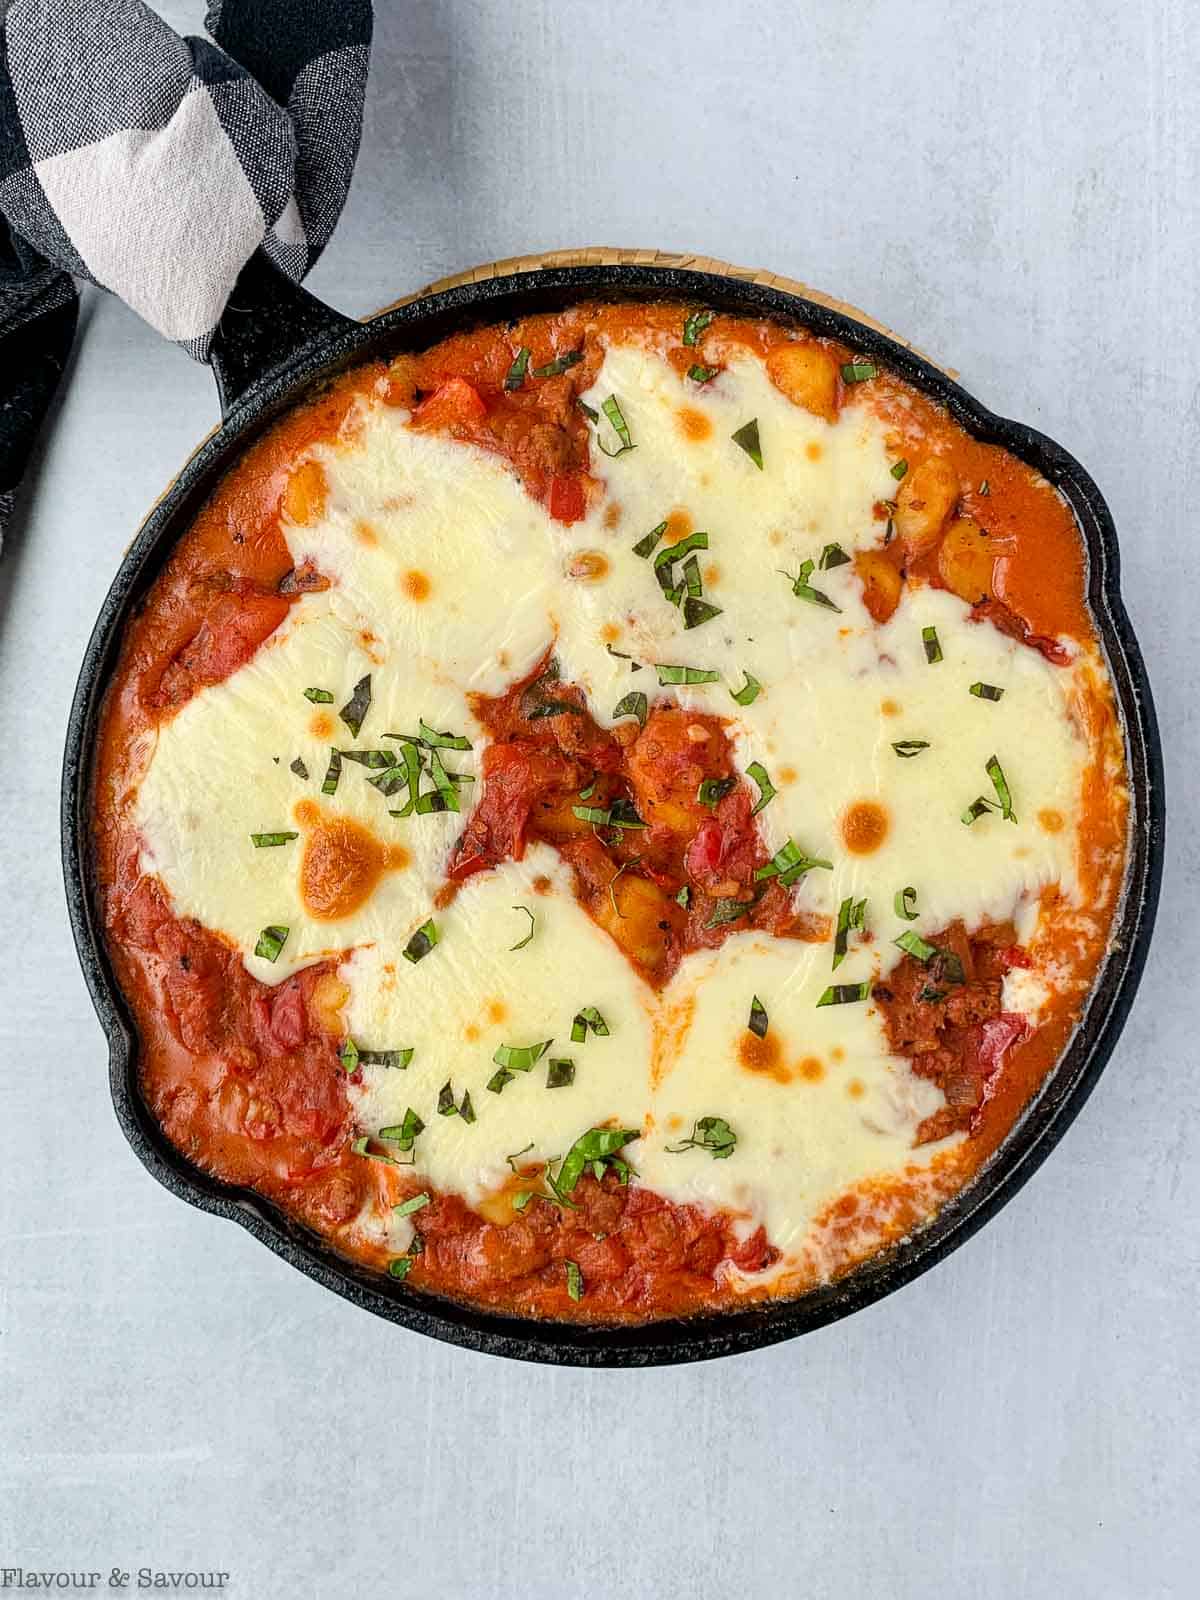 A cast iron skillet with tomato gnocchi bake with plant-based meat and melted cheese.